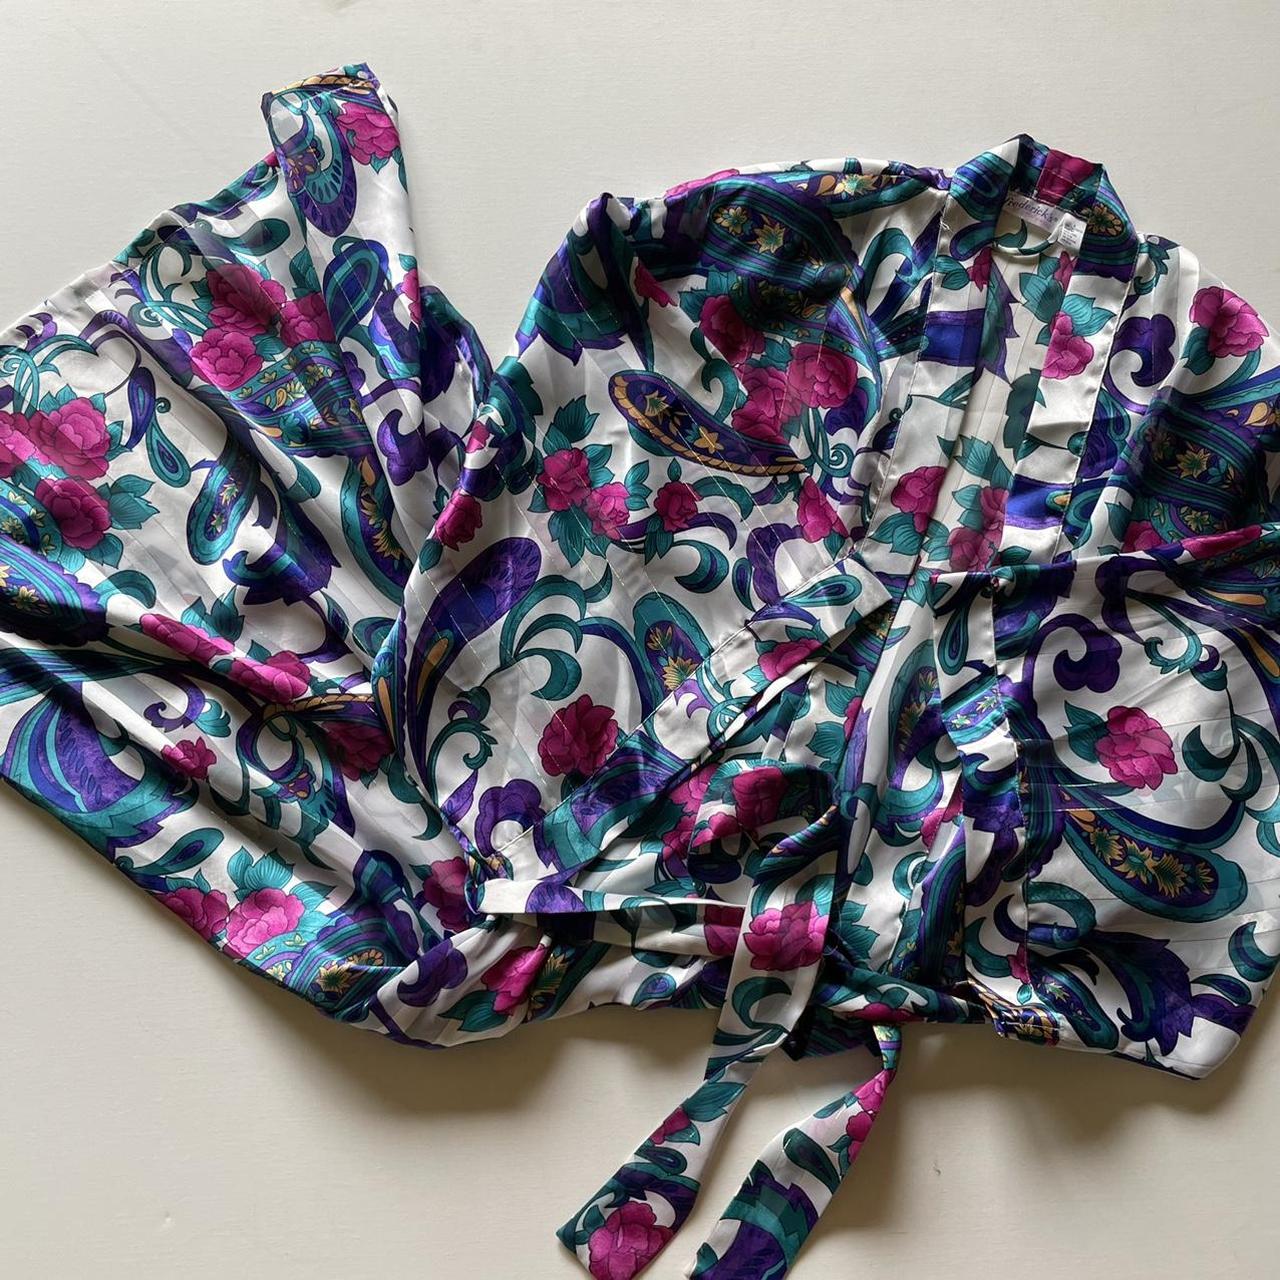 Product Image 1 - 90's Bright Floral Robe (S)

Gorgeous